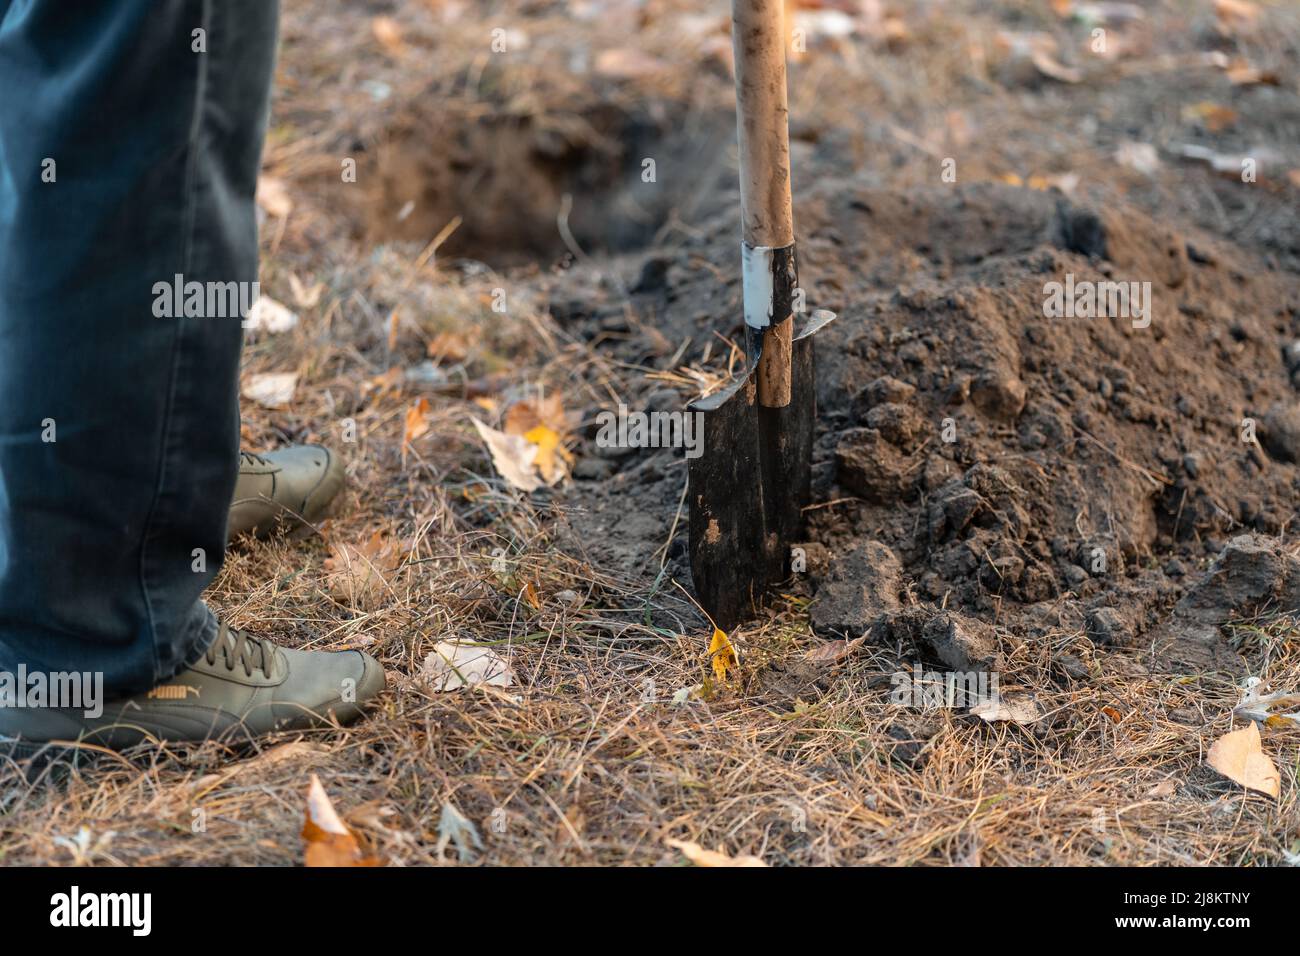 planting new trees with gardening tools or man with shovel digging ground Stock Photo